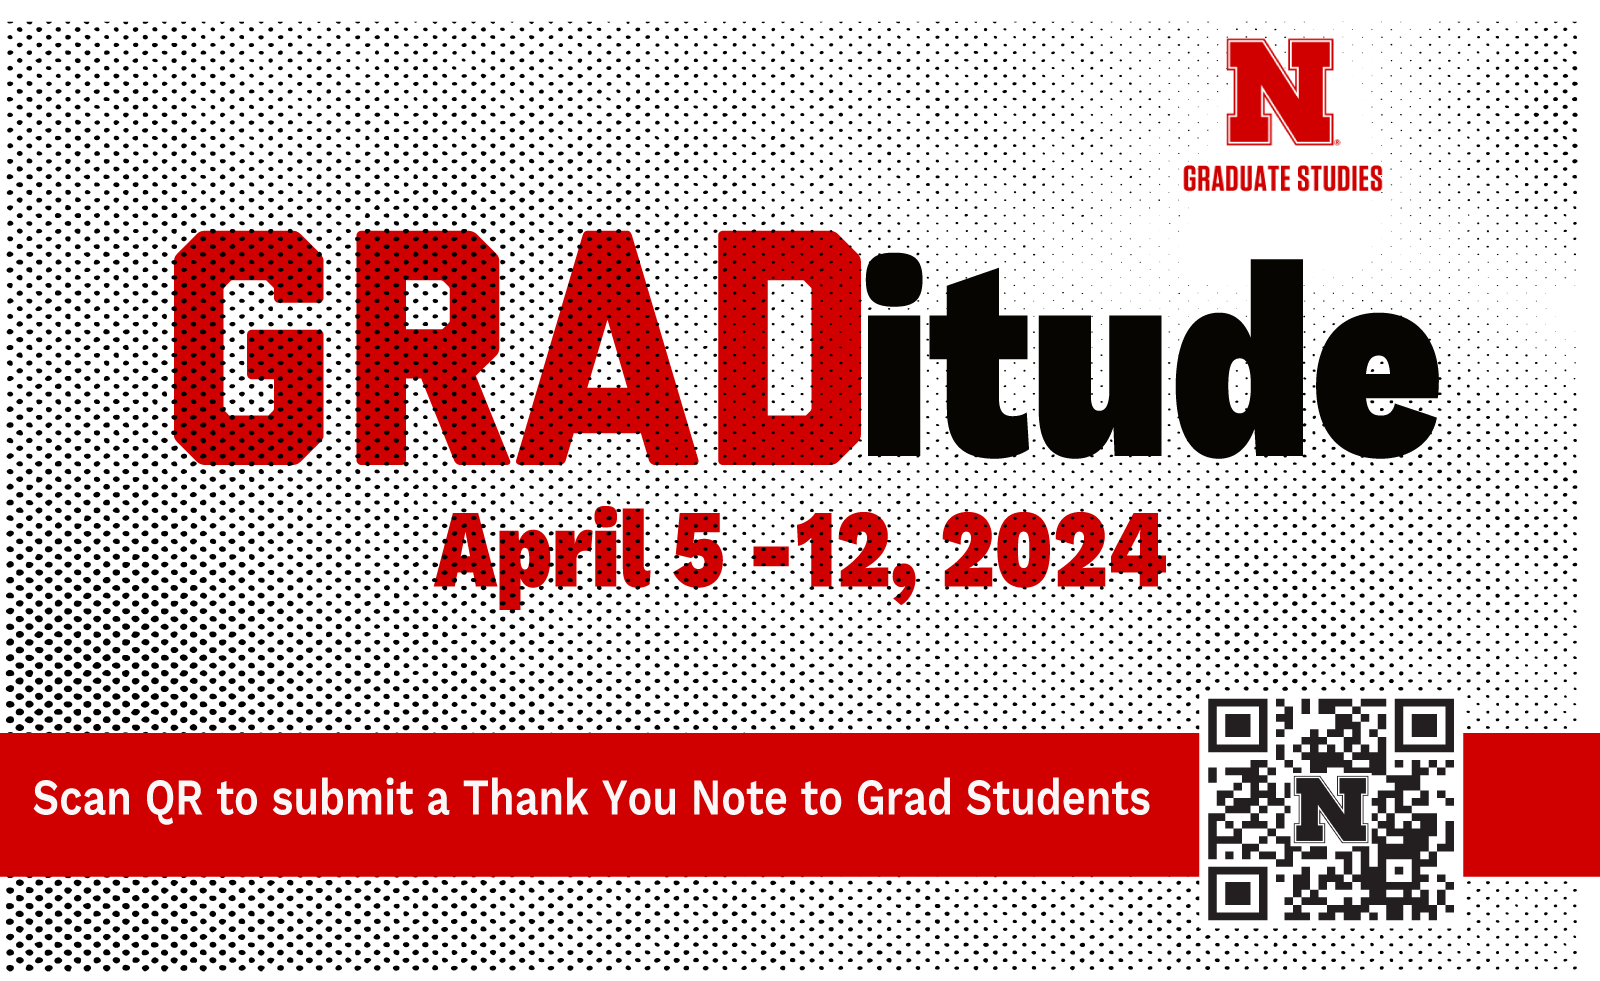 Graditude: Send a Thank you Note to Grad Students